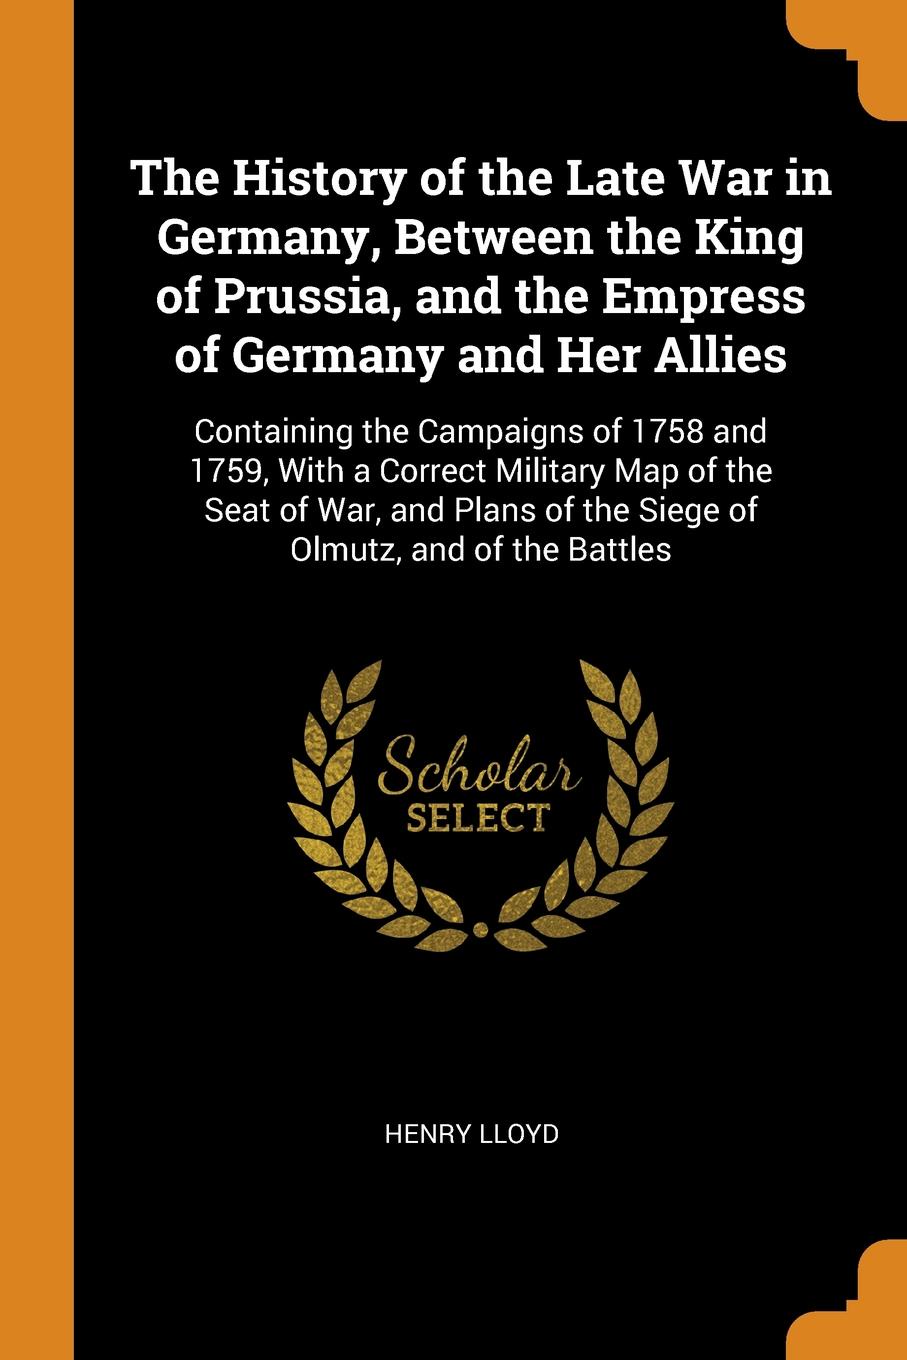 The History of the Late War in Germany, Between the King of Prussia, and the Empress of Germany and Her Allies. Containing the Campaigns of 1758 and 1759, With a Correct Military Map of the Seat of War, and Plans of the Siege of Olmutz, and of the...